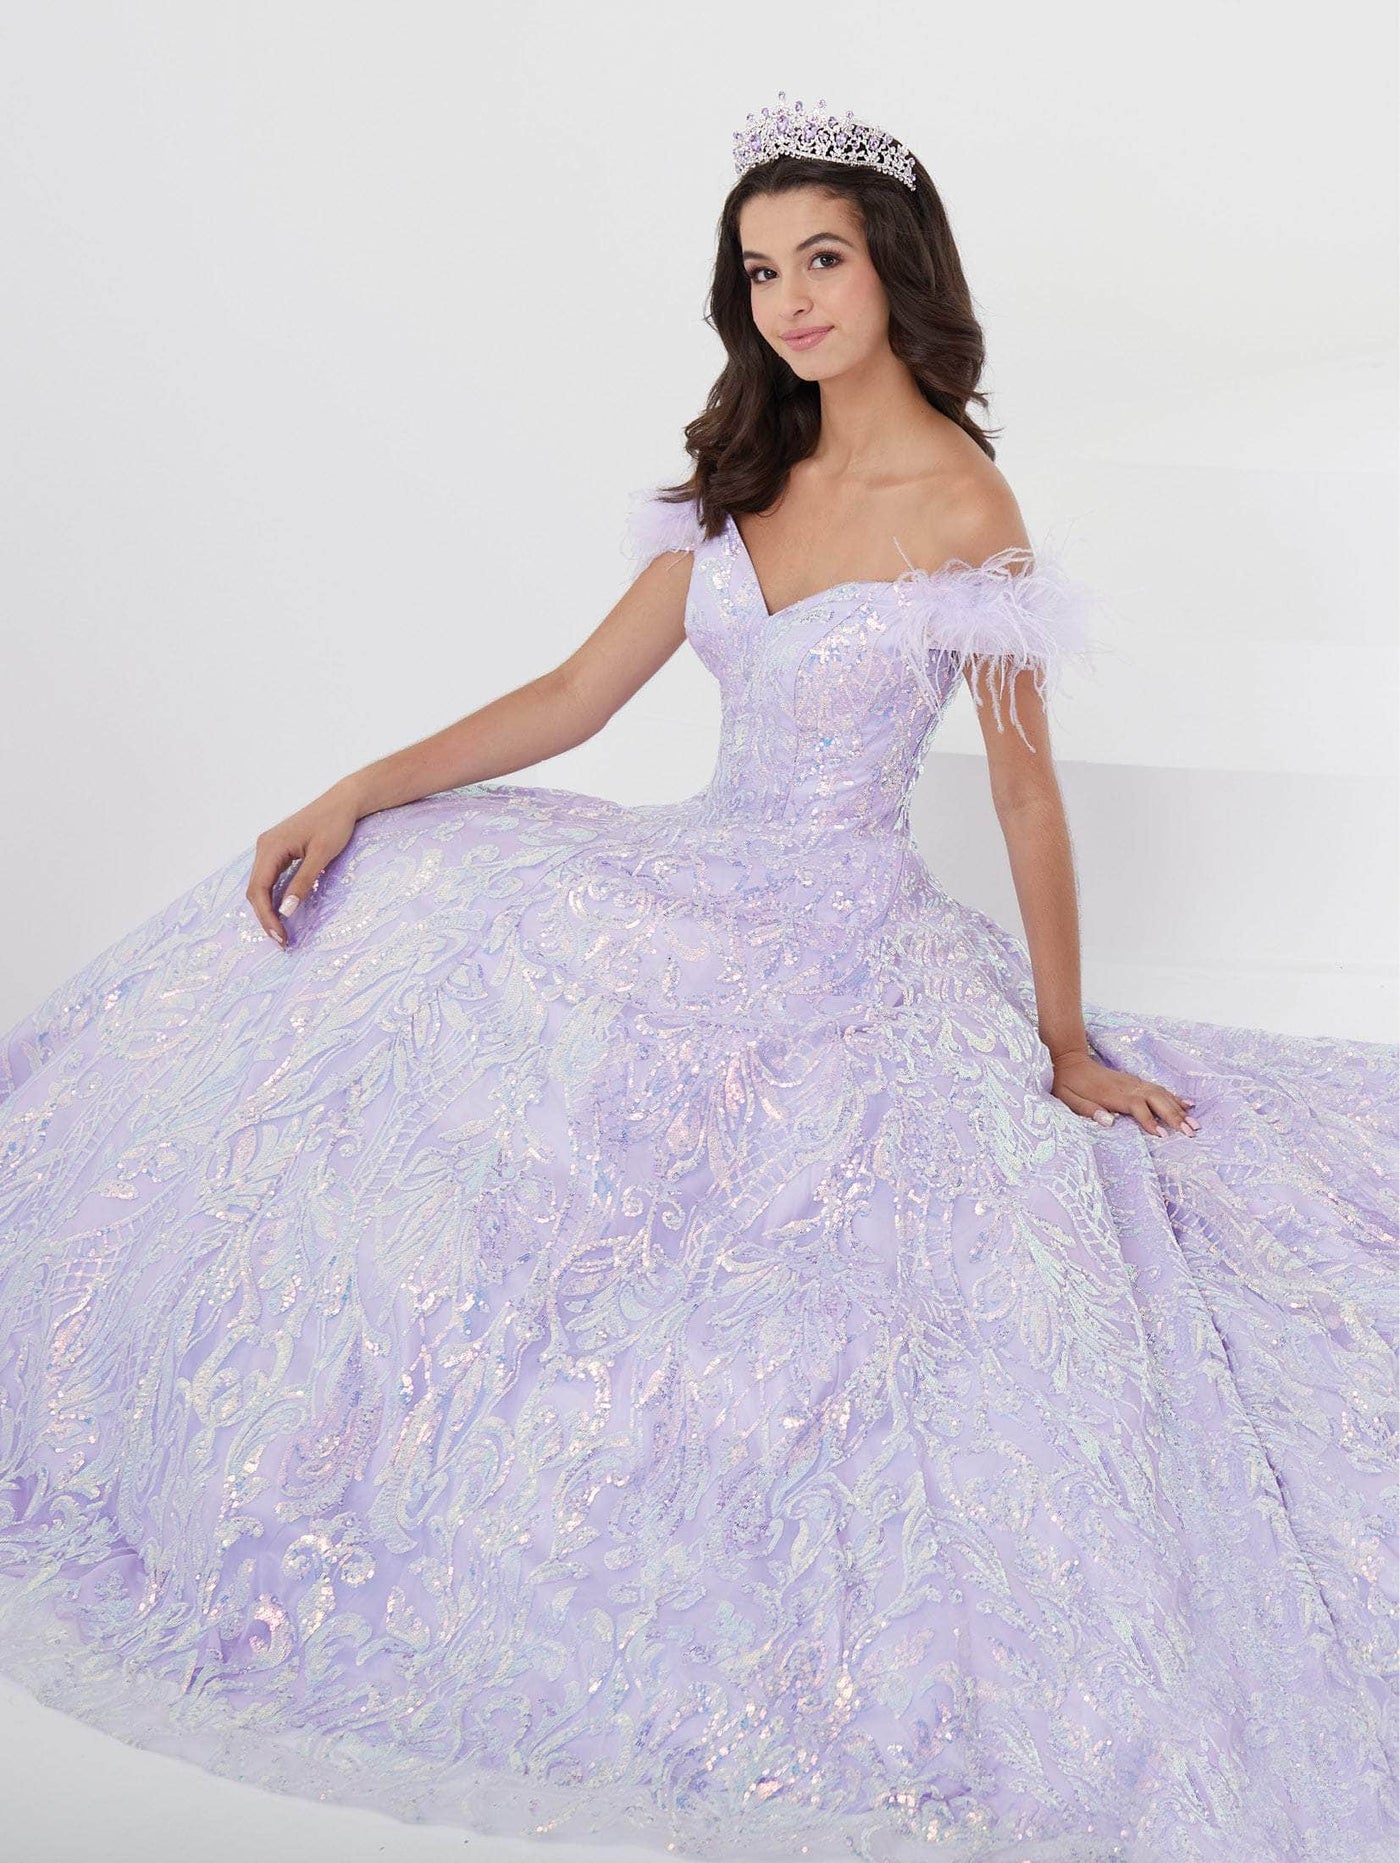 Fiesta Gowns 56464 - Feathered Off Shoulder Ball Gown Ball Gowns 0 / Lilac Multi